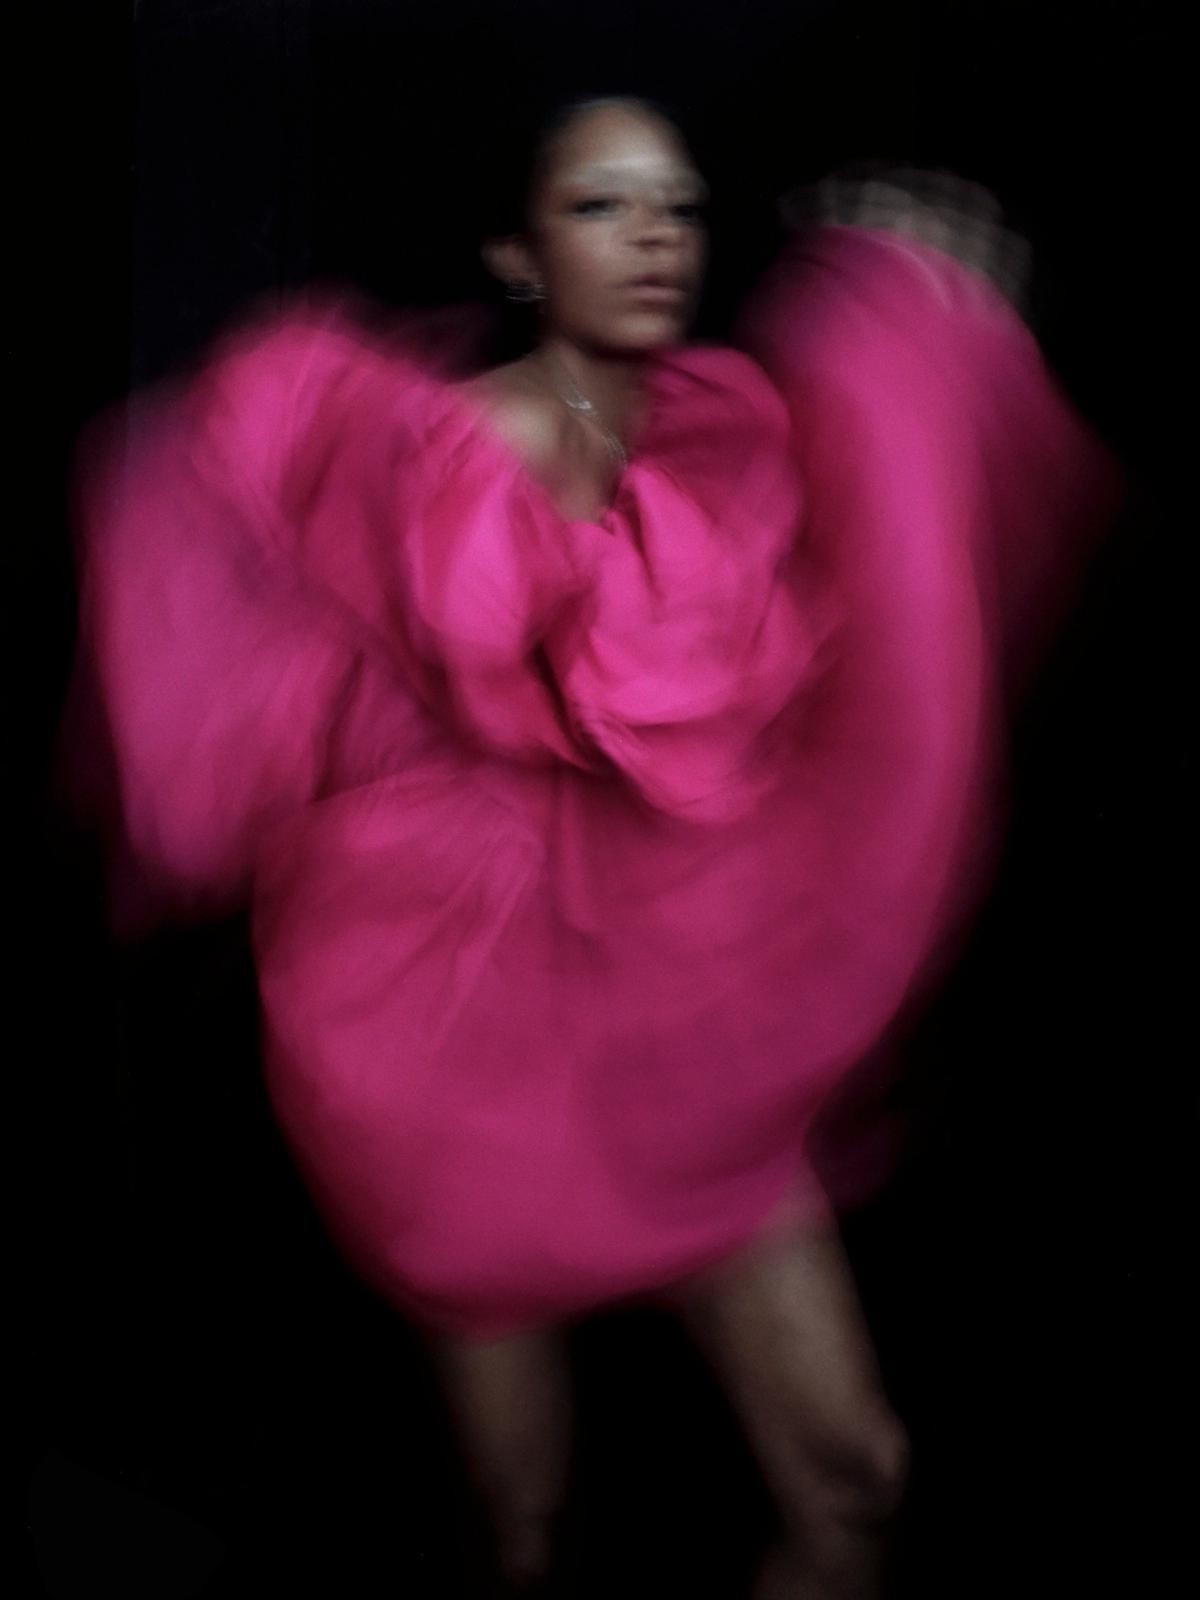 A blurry portrait of artist Kelsey Lu against a dark background. They wear what appears to be a pink dress that is fanning up and out with their movement. 